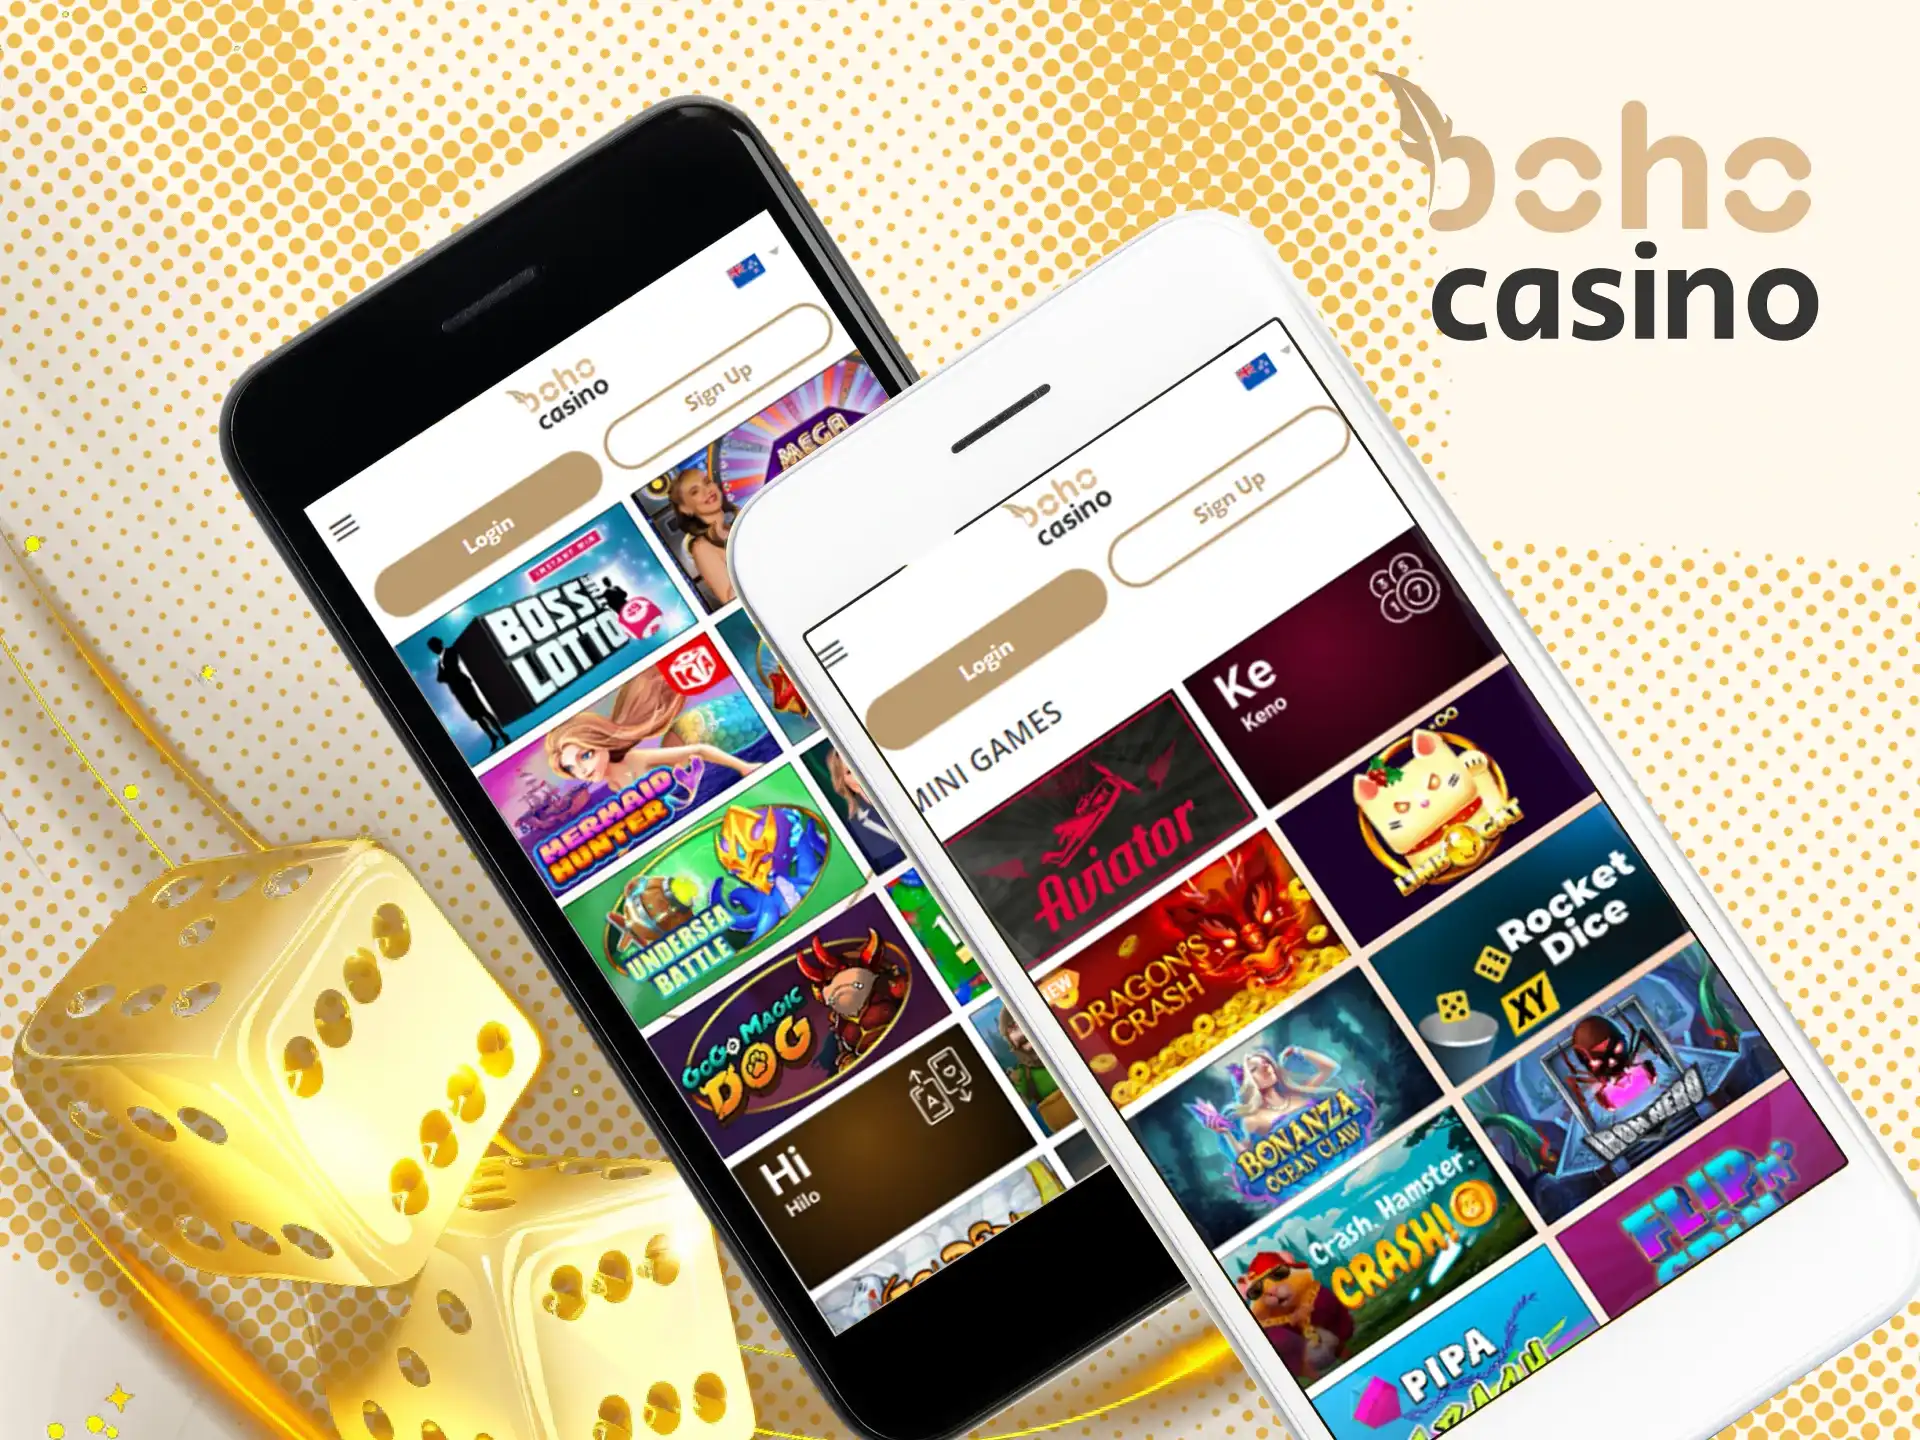 You can play Boho Casino mini games via Android and iOS devices.